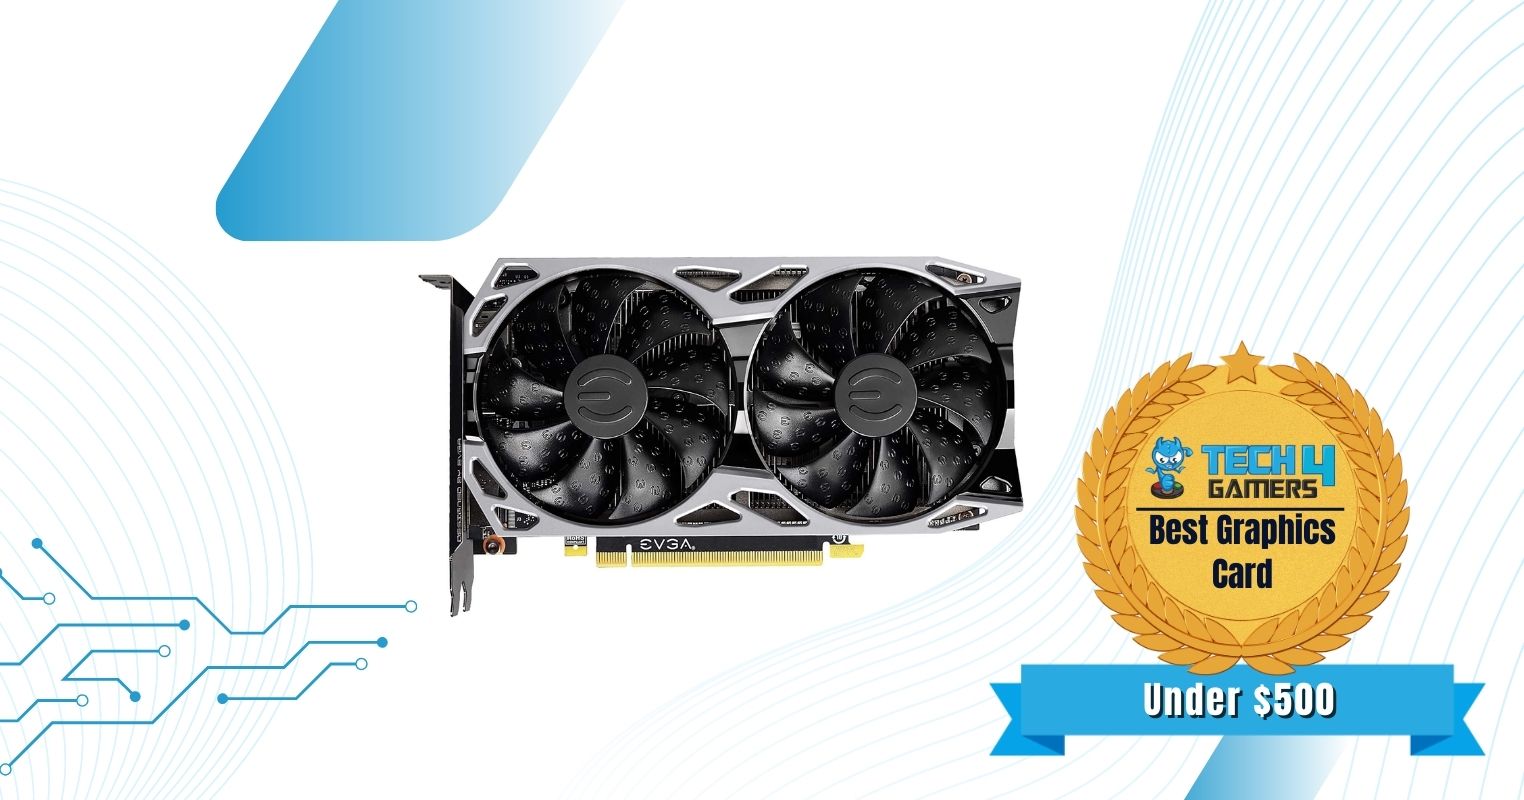 EVGA GeForce GTX 1650 Super SC Ultra Graphics Card For Best Gaming PC Under $500